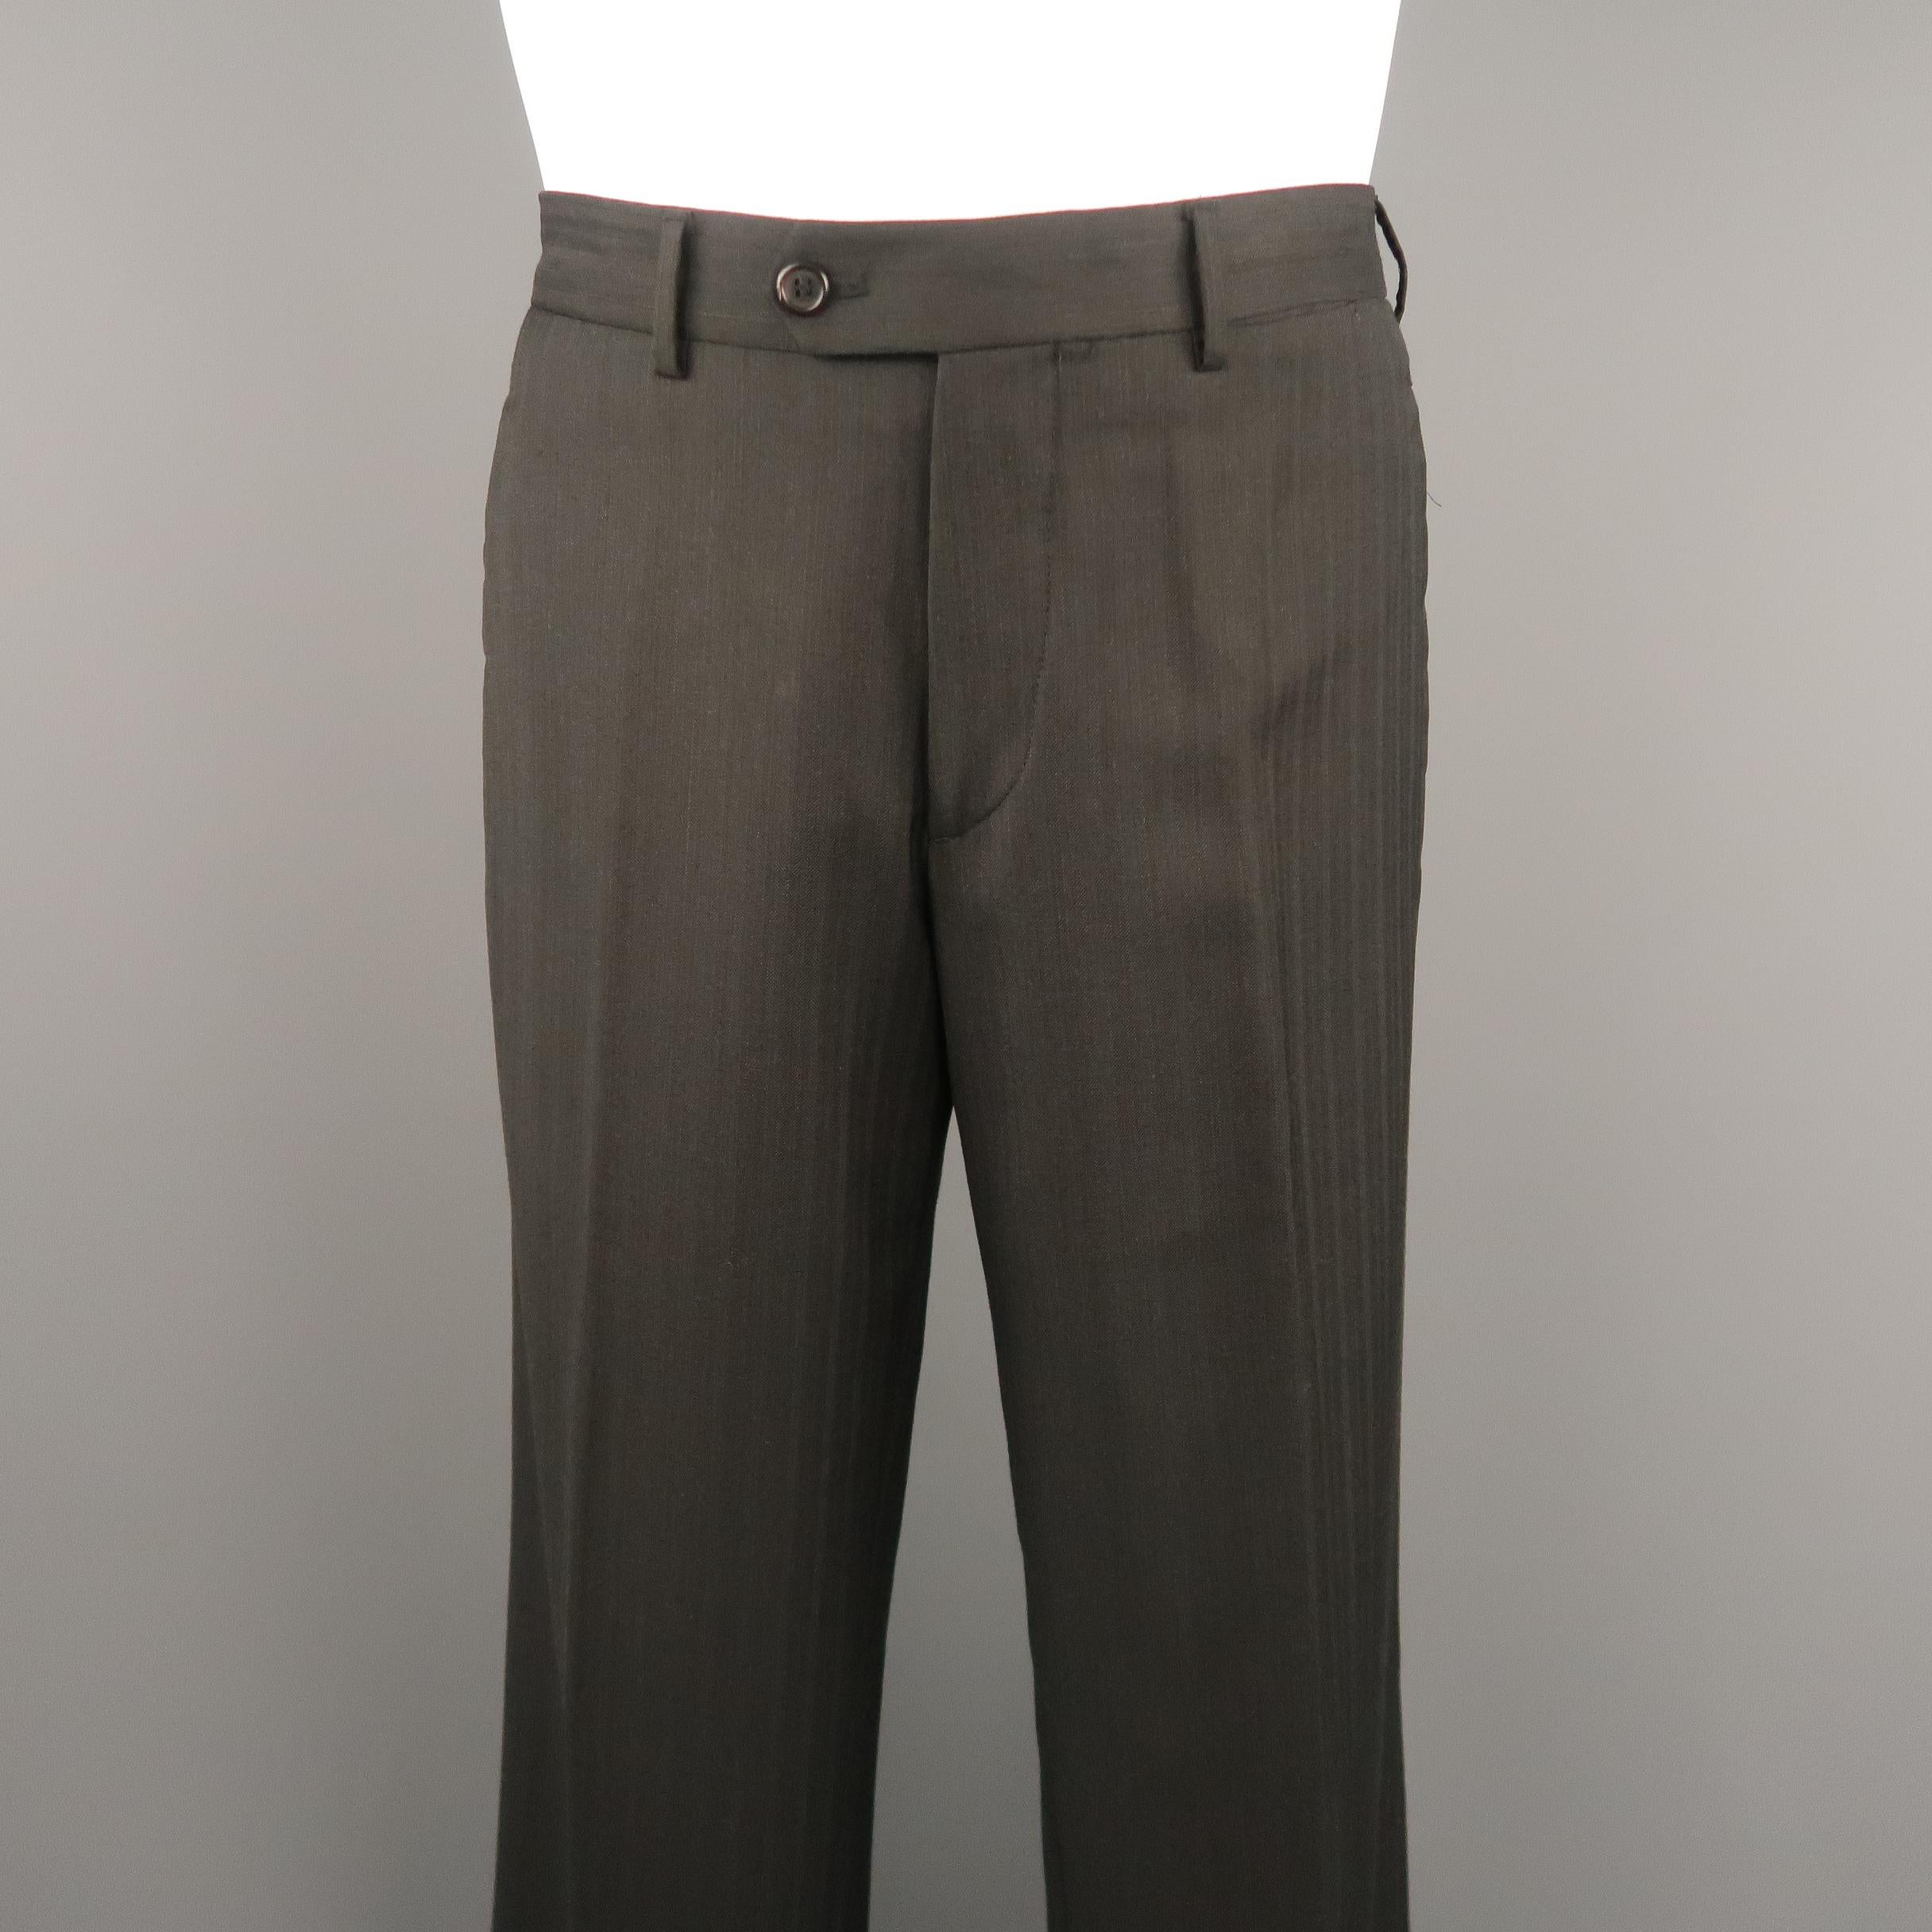 PRADA dress pants come in black & brown striped wool with a relaxed fit and tab button waistband. Made in Italy.
 
Excellent Pre-Owned Condition.
Marked: IT 48
 
Measurements:
 
Waist: 32 in.
Rise: 10 in.
Inseam: 31 in.